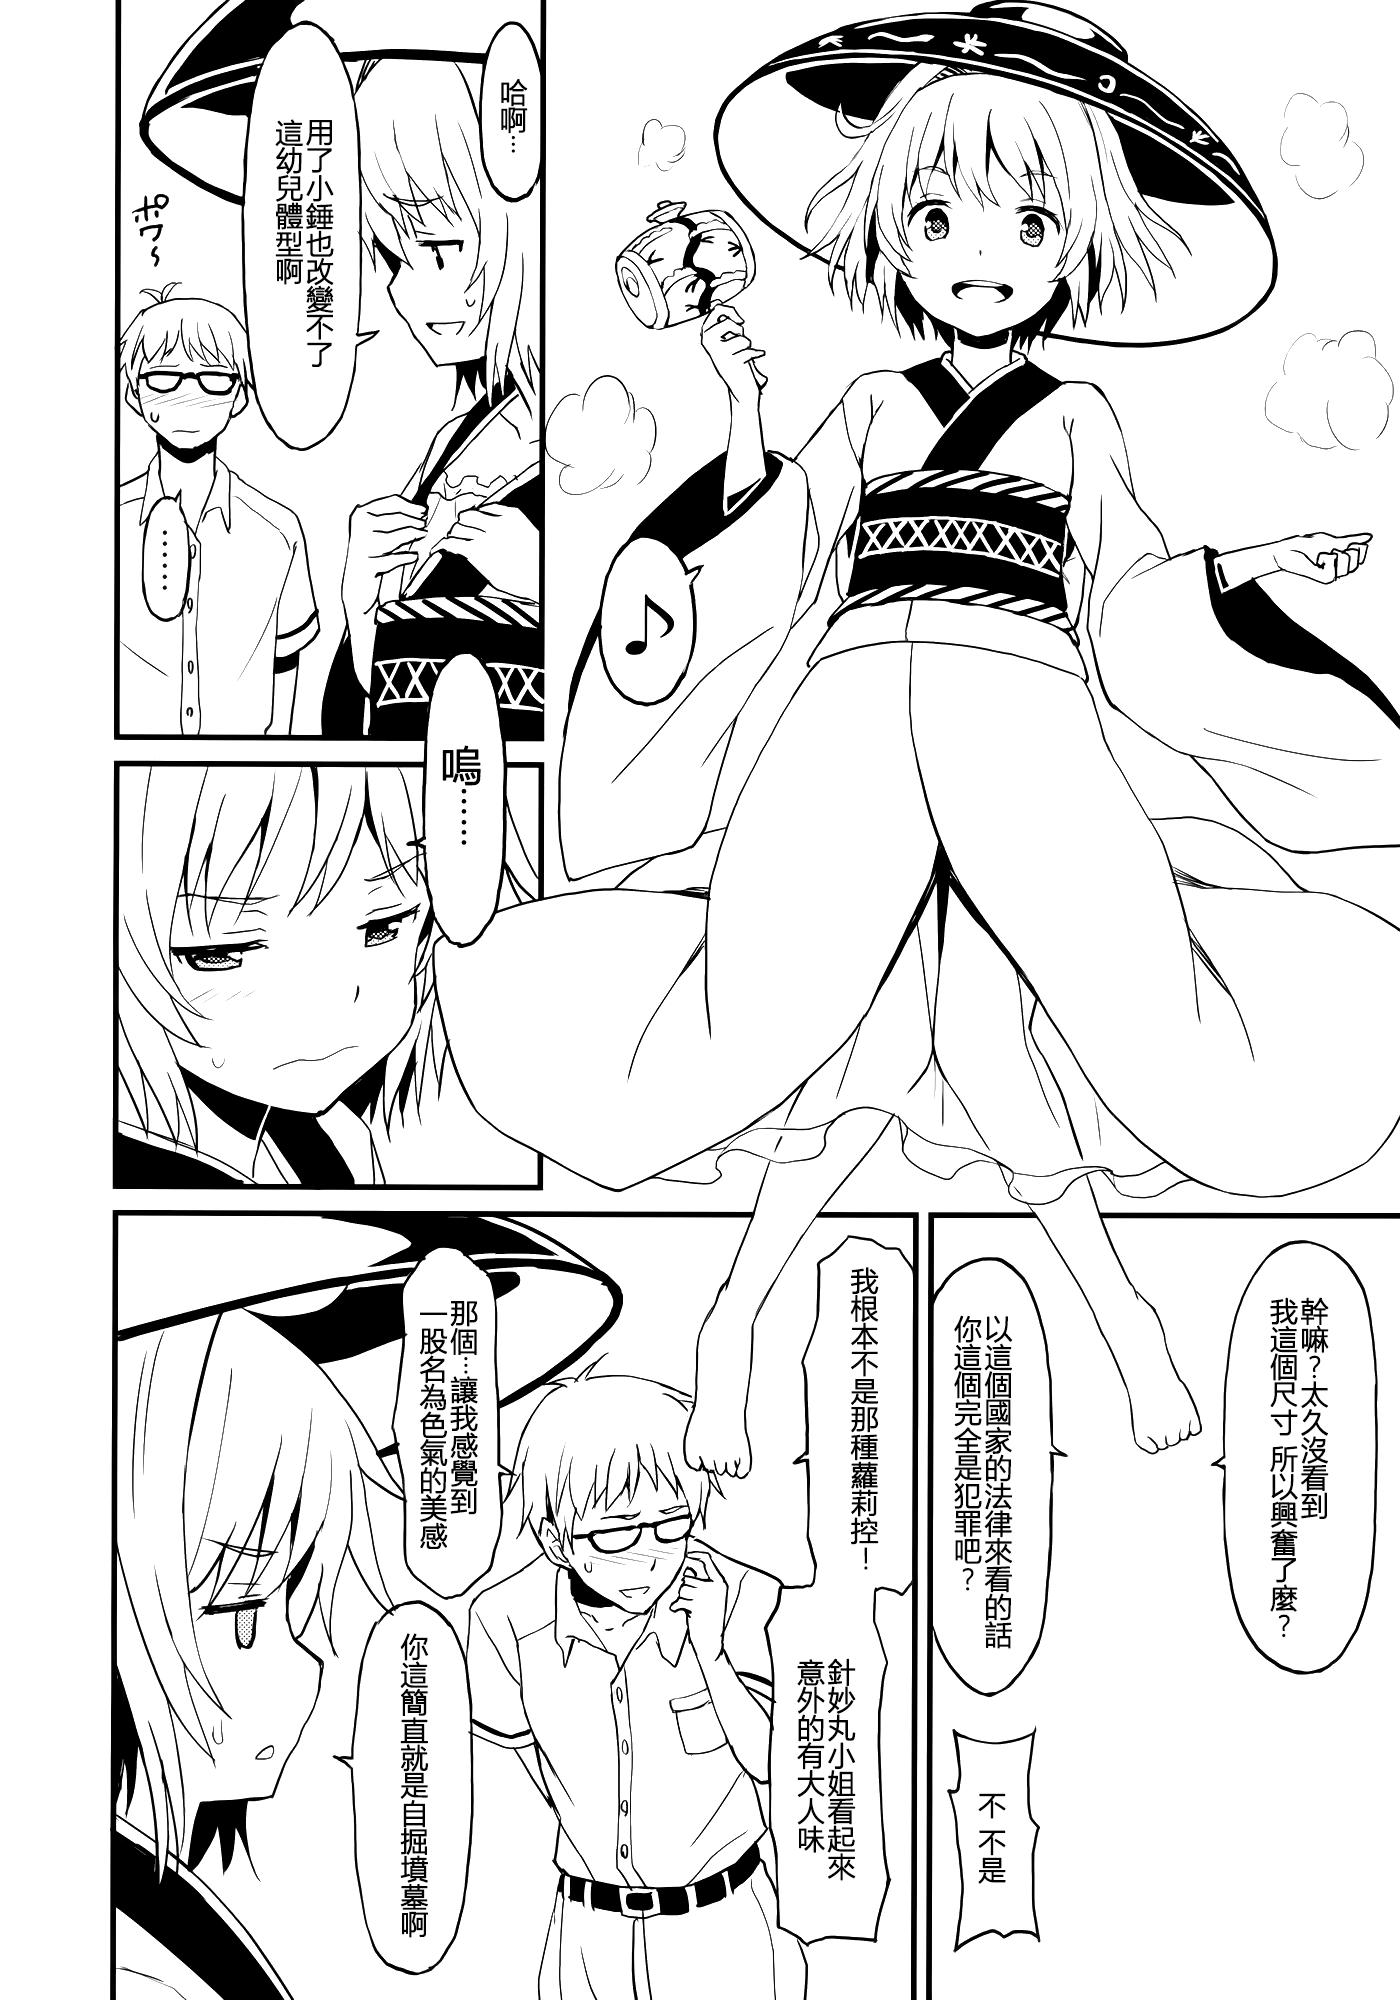 Hot Girls Getting Fucked Chiisana Seesaw Lovers - Touhou project Free Rough Porn - Page 6